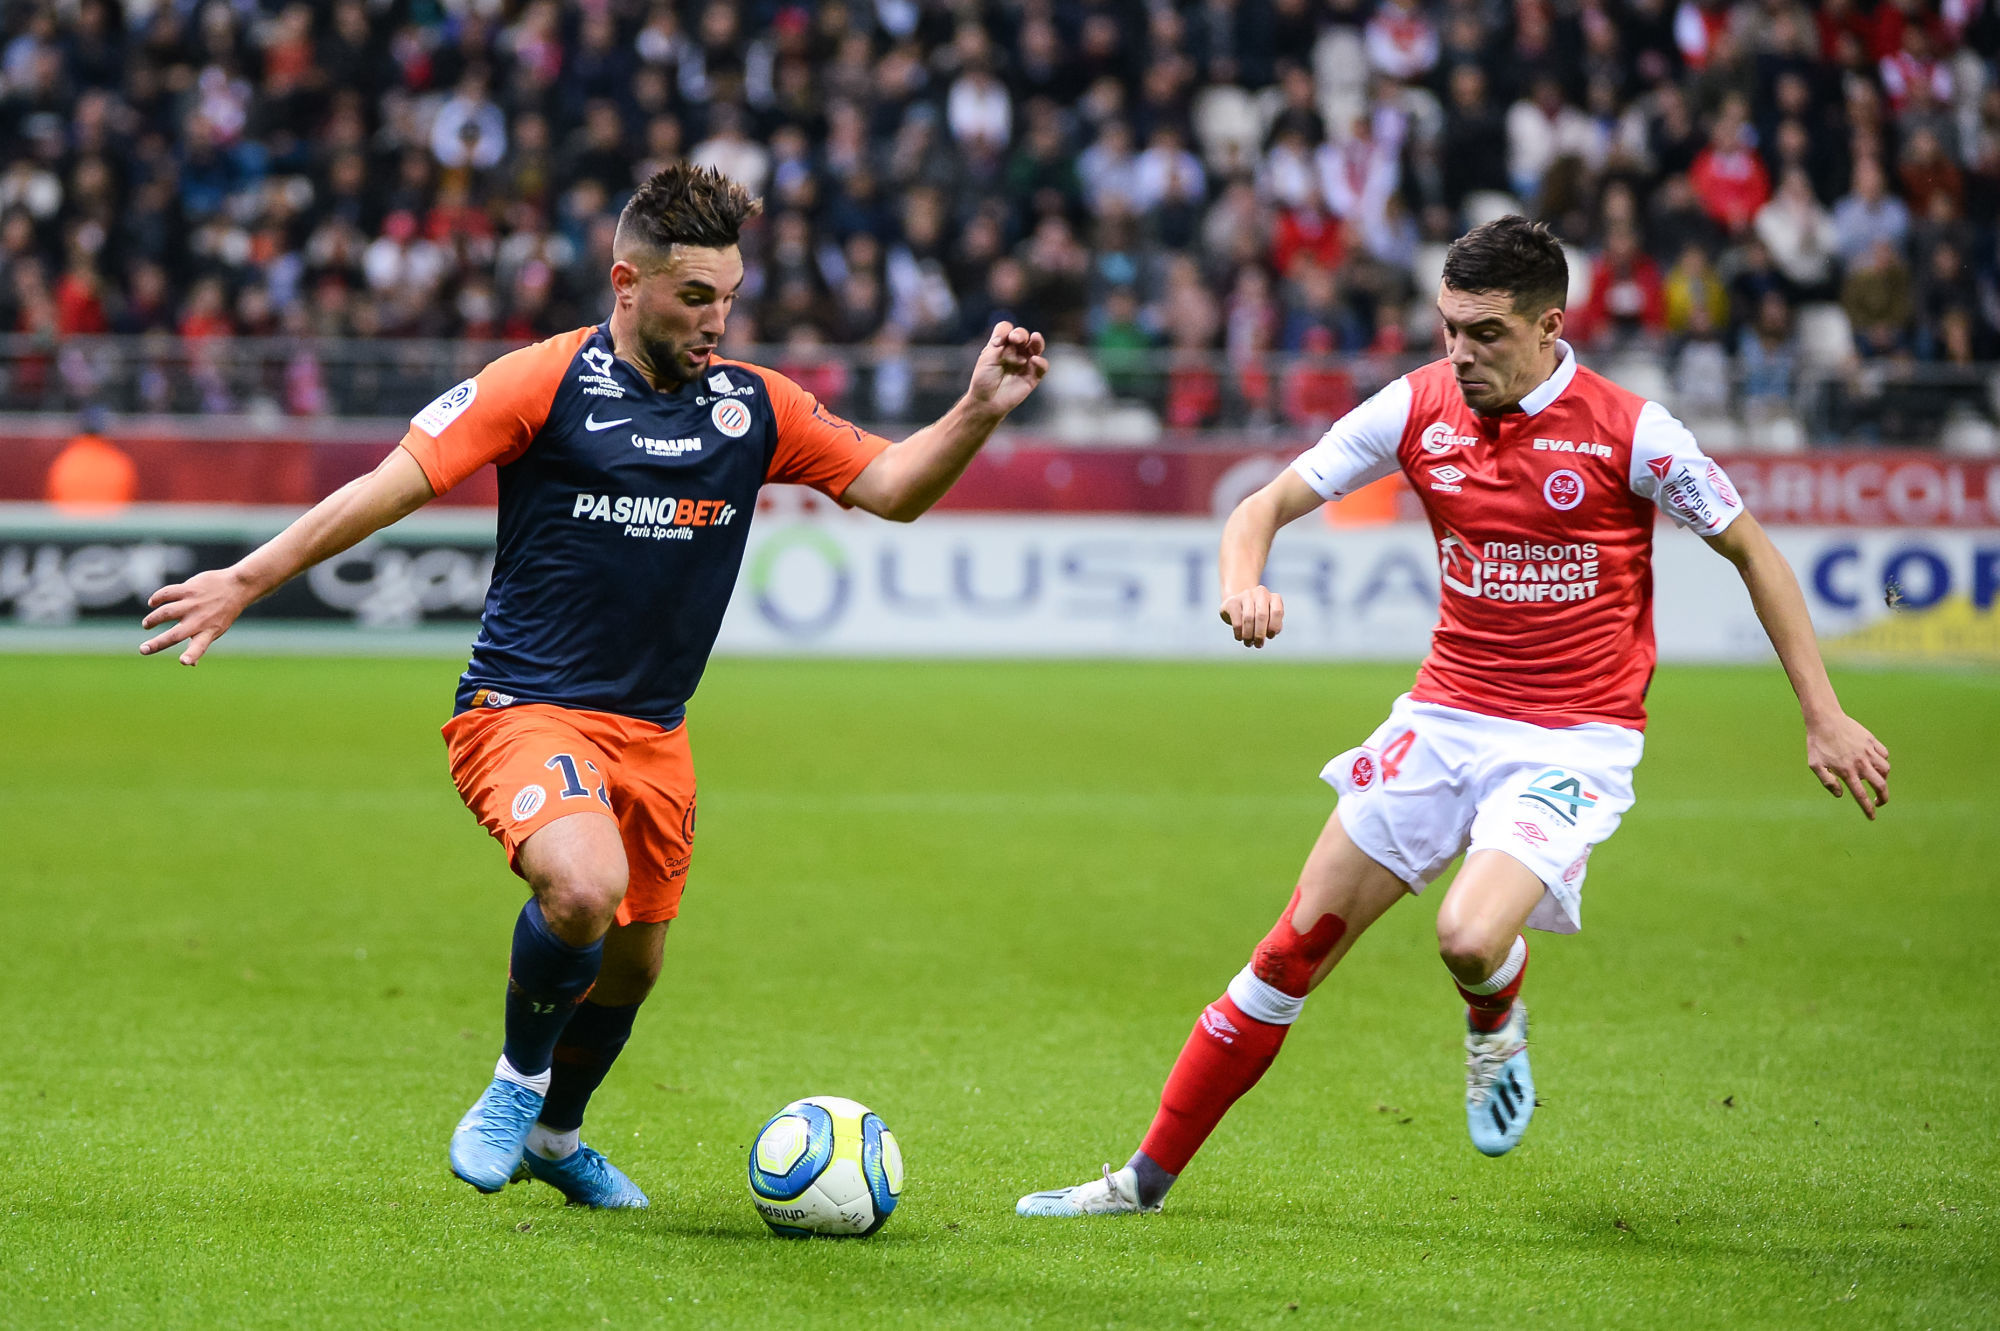 Jordan FERRI of Montpellier and Mathieu CAFARO of Reims during the French Ligue 1 football match between Stade de Reims and Montpellier HSC at Stade Auguste Delaune on October 19, 2019 in Reims, France. (Photo by Baptiste Fernandez/Icon Sport) - Jordan FERRI - Mathieu CAFARO - Stade Auguste-Delaune - Reims (France)